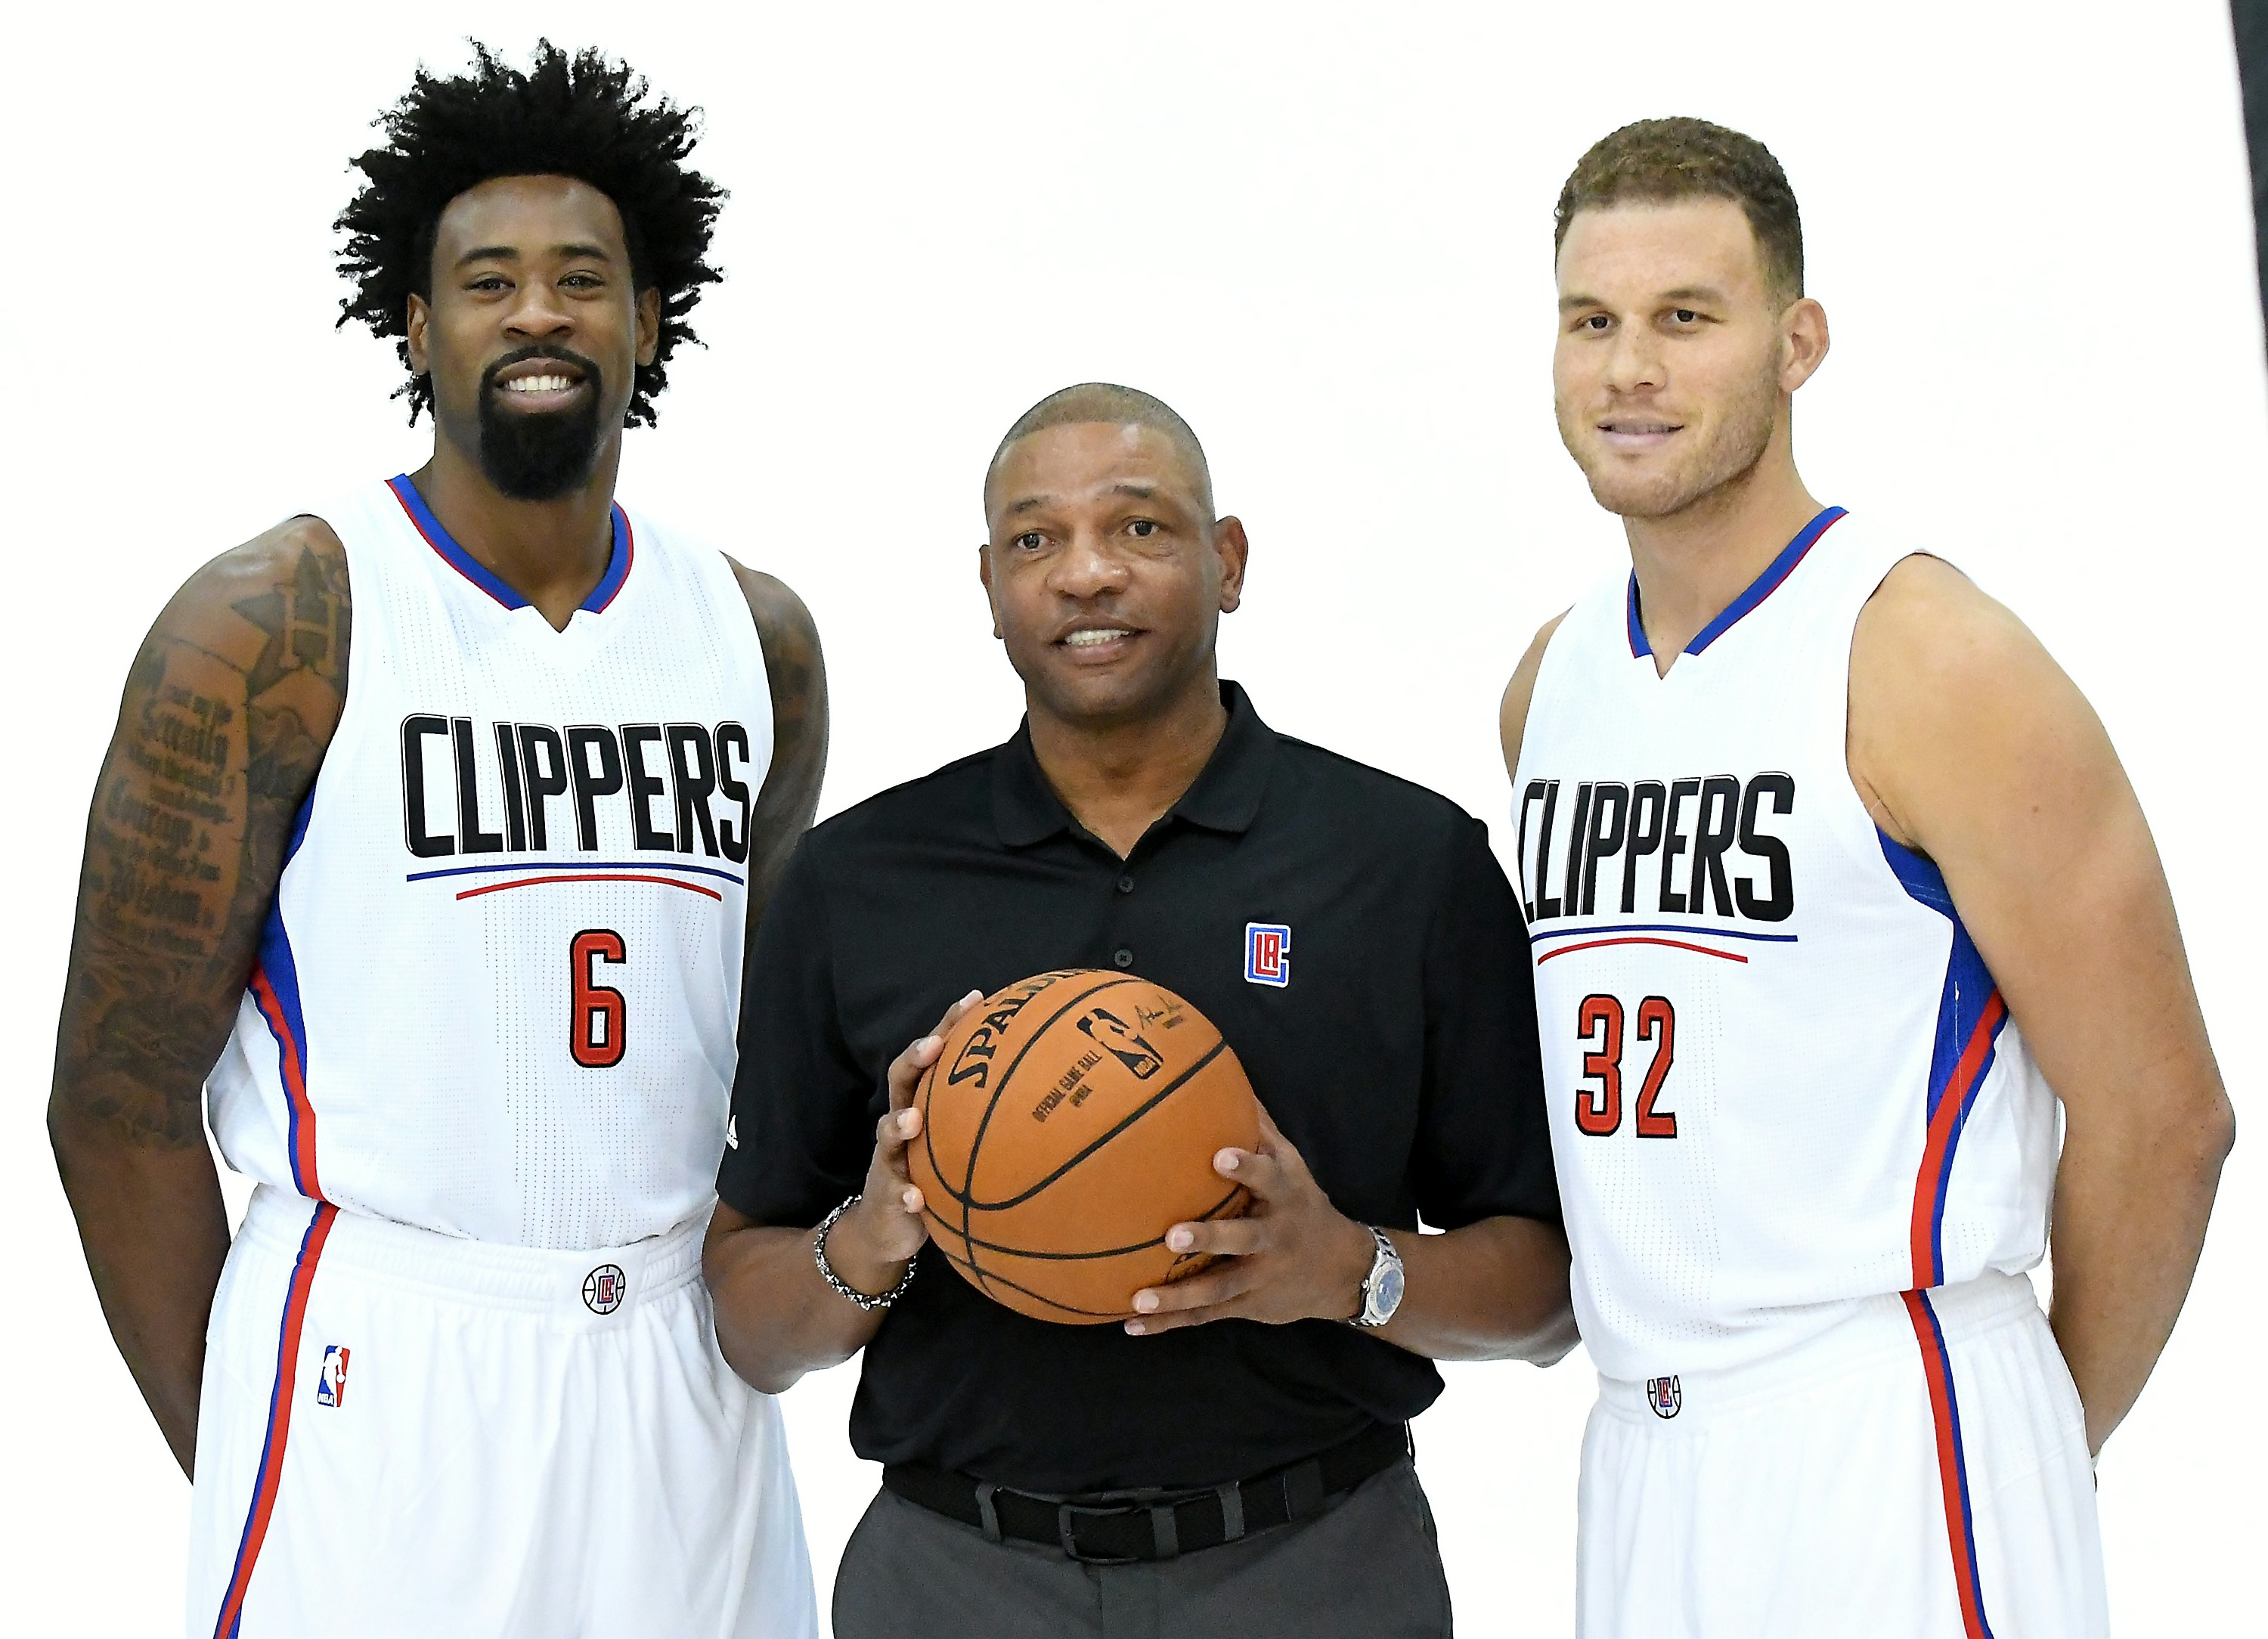 2017 clippers jersey